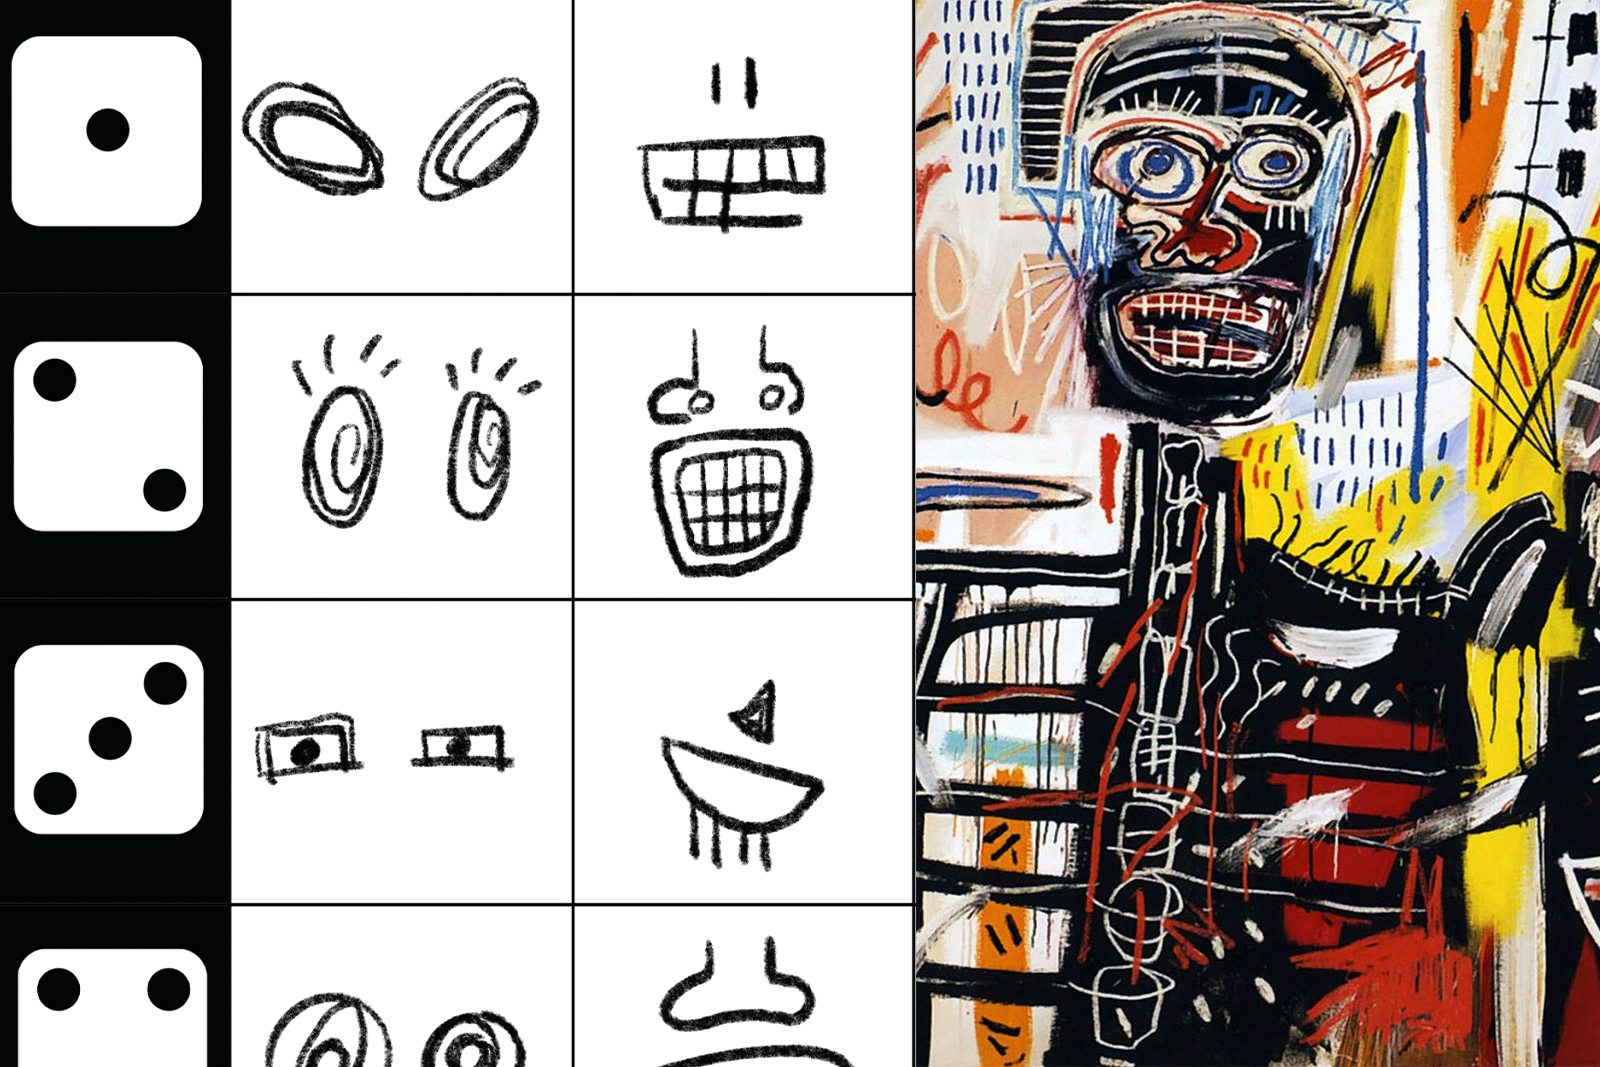 Roll a Basquiat detail image, including dice, image components, and detail image of Basquiat painting of a skeletal figure